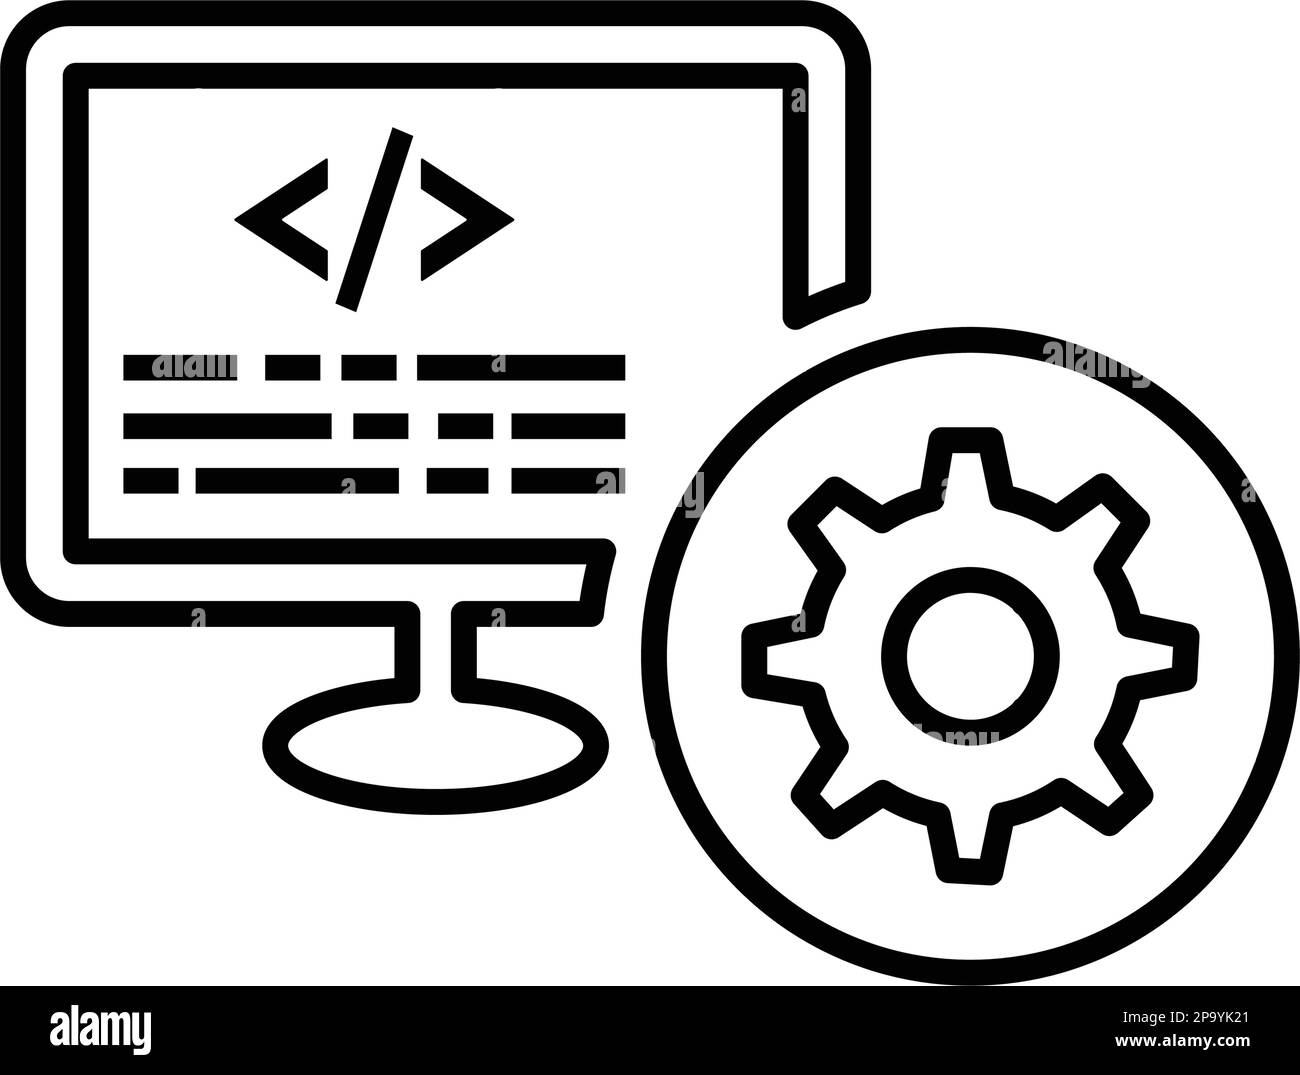 Coding input, programming icon. Beautiful design and fully editable vector for commercial use, printed files and presentations, Promotional Materials, Stock Vector